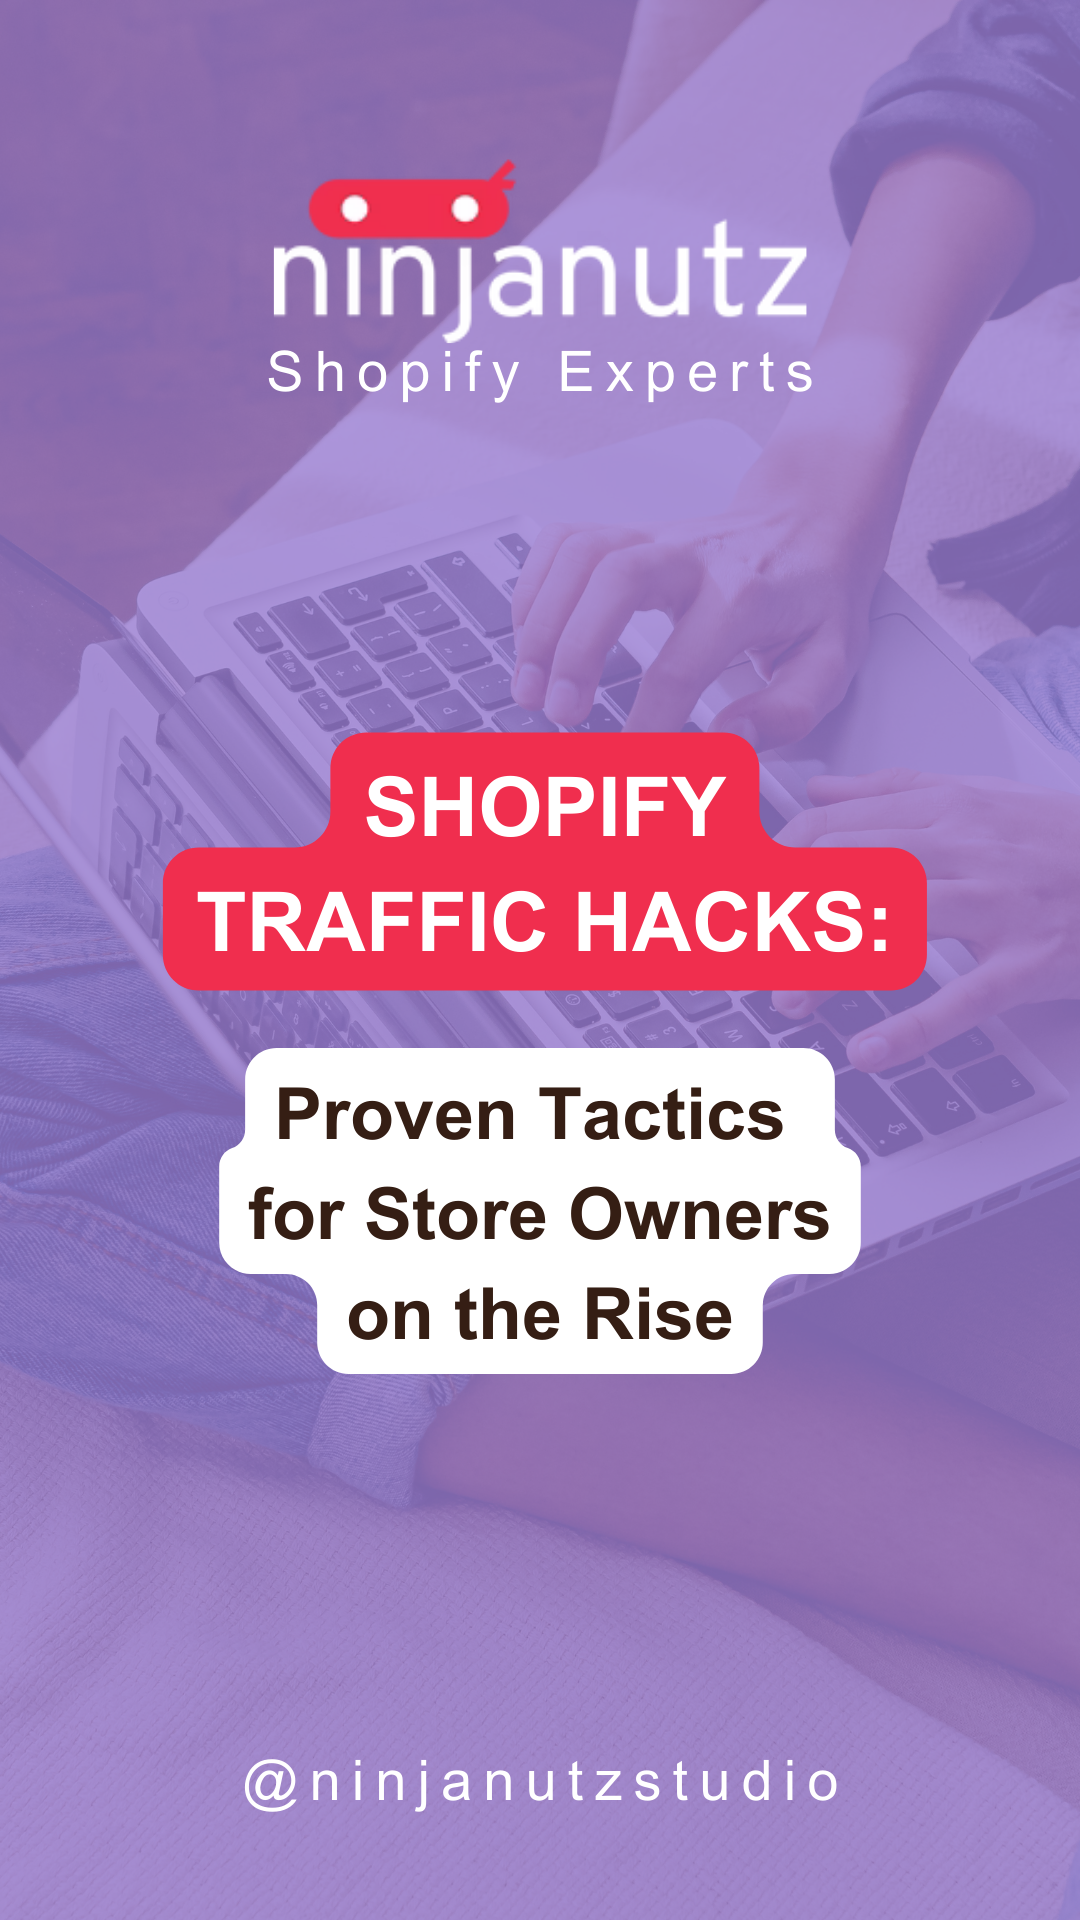 Shopify Traffic Hacks: Proven Tactics for Store Owners on the Rise NinjaNutz®